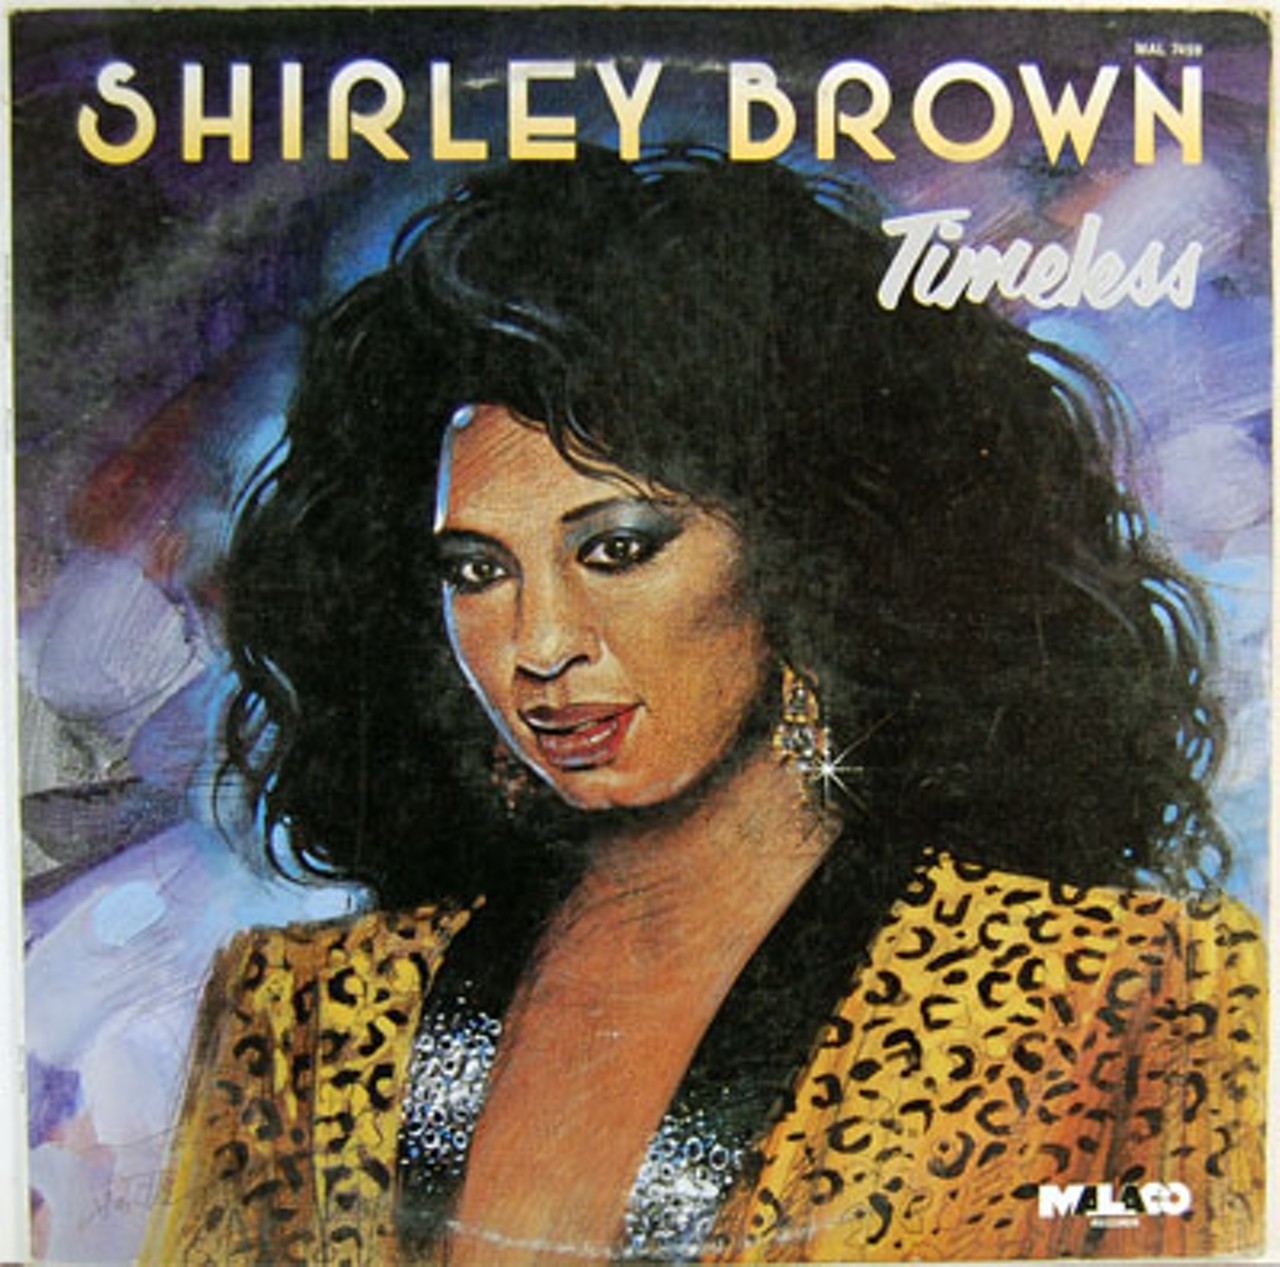 Shirley Brown -- though this record was not on Stax -- grew up in St. Louis and released her debut album, Woman to Woman, in 1975 on Stax.Read "Voices Carry: Shirley Brown, the forgotten soul sister, sings on," by Roy Kasten.